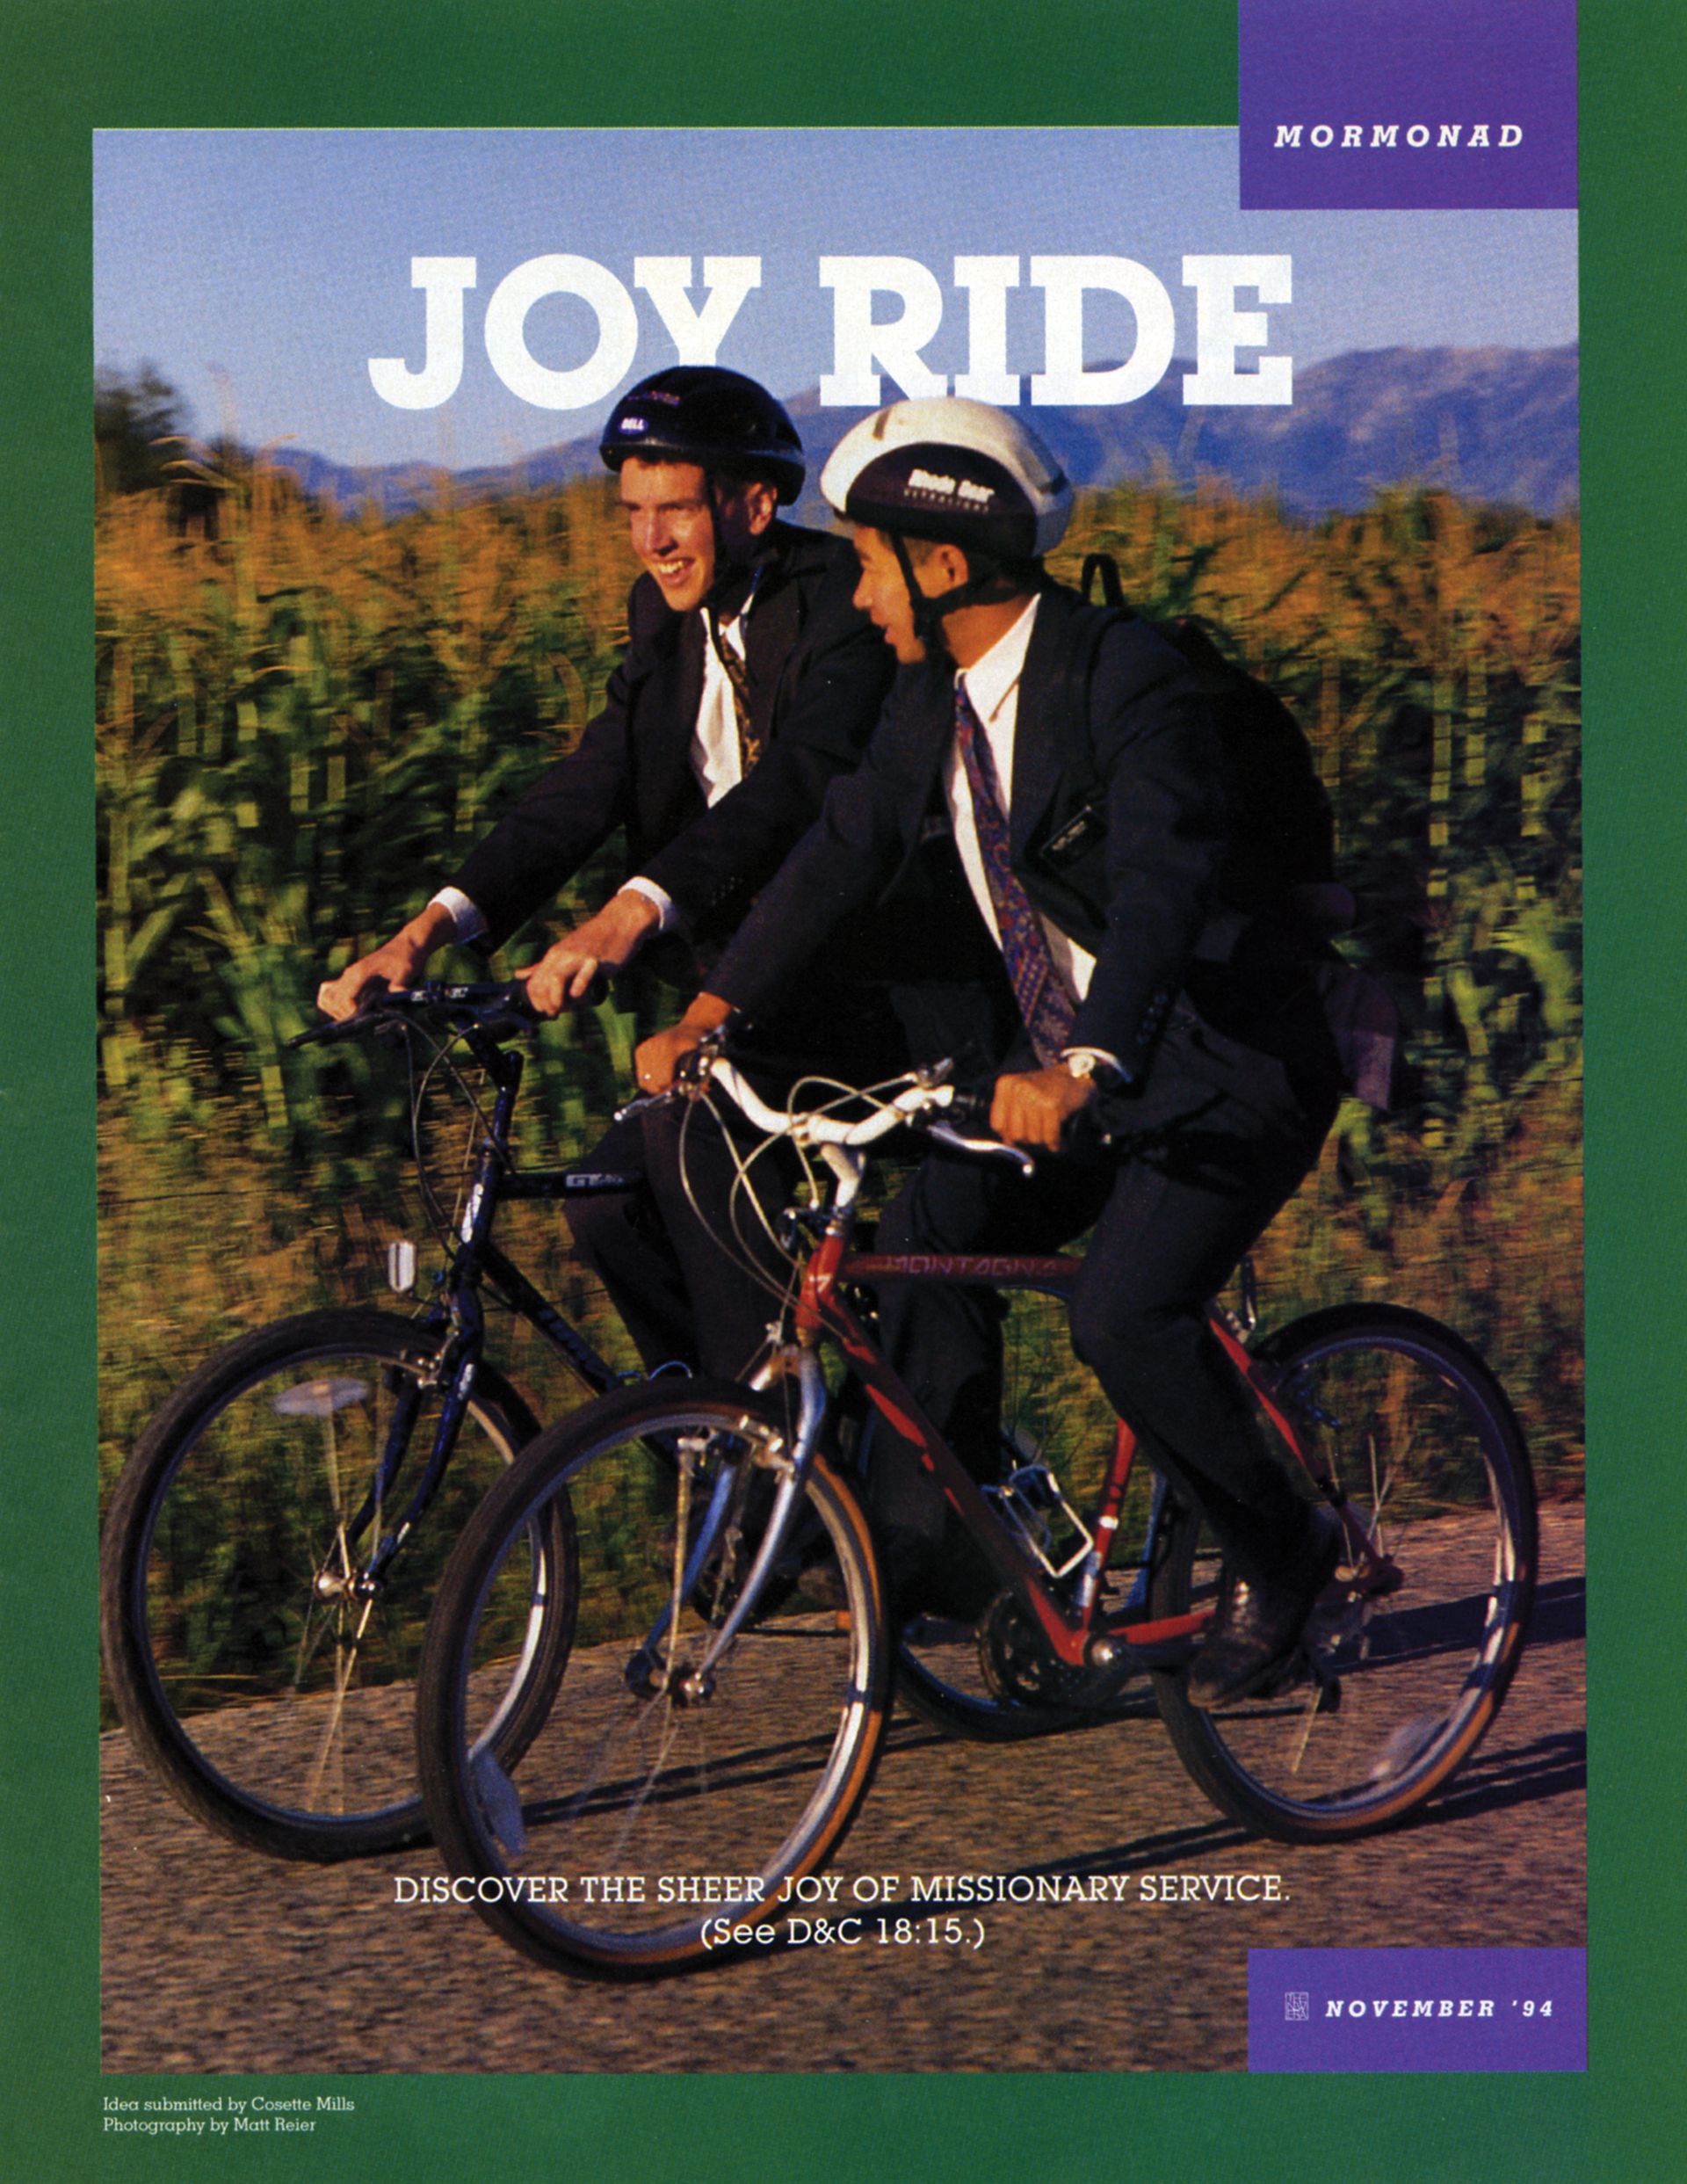 Joy Ride. Discover the sheer joy of missionary service. (See D&C 18:15.) Nov. 1994 © undefined ipCode 1.